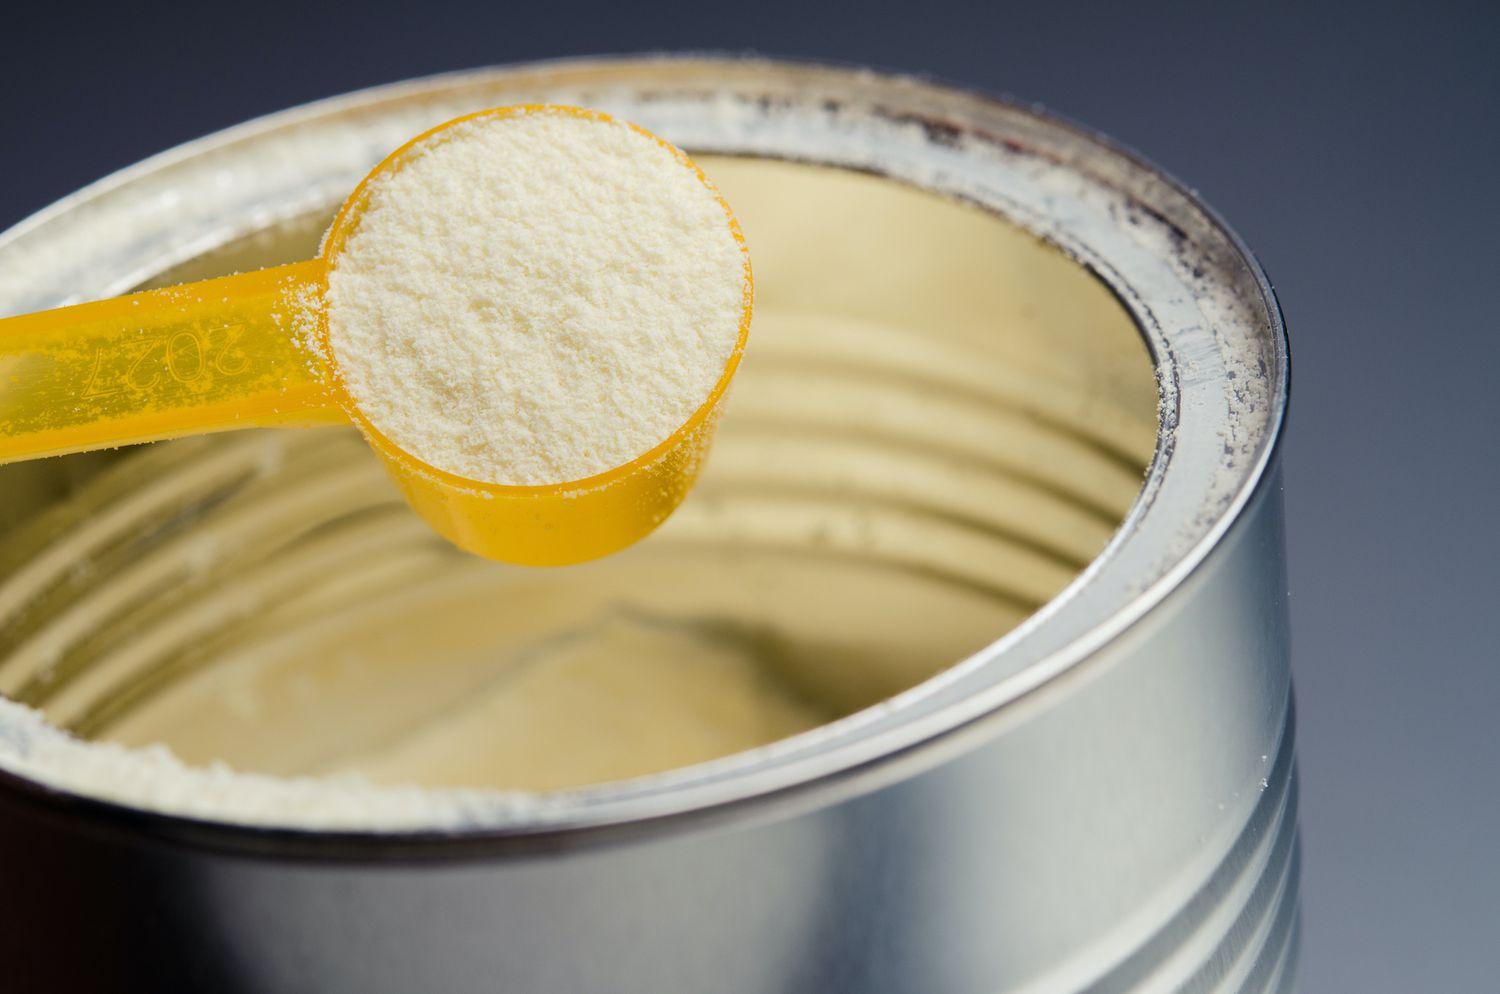 What Is Powdered Milk?